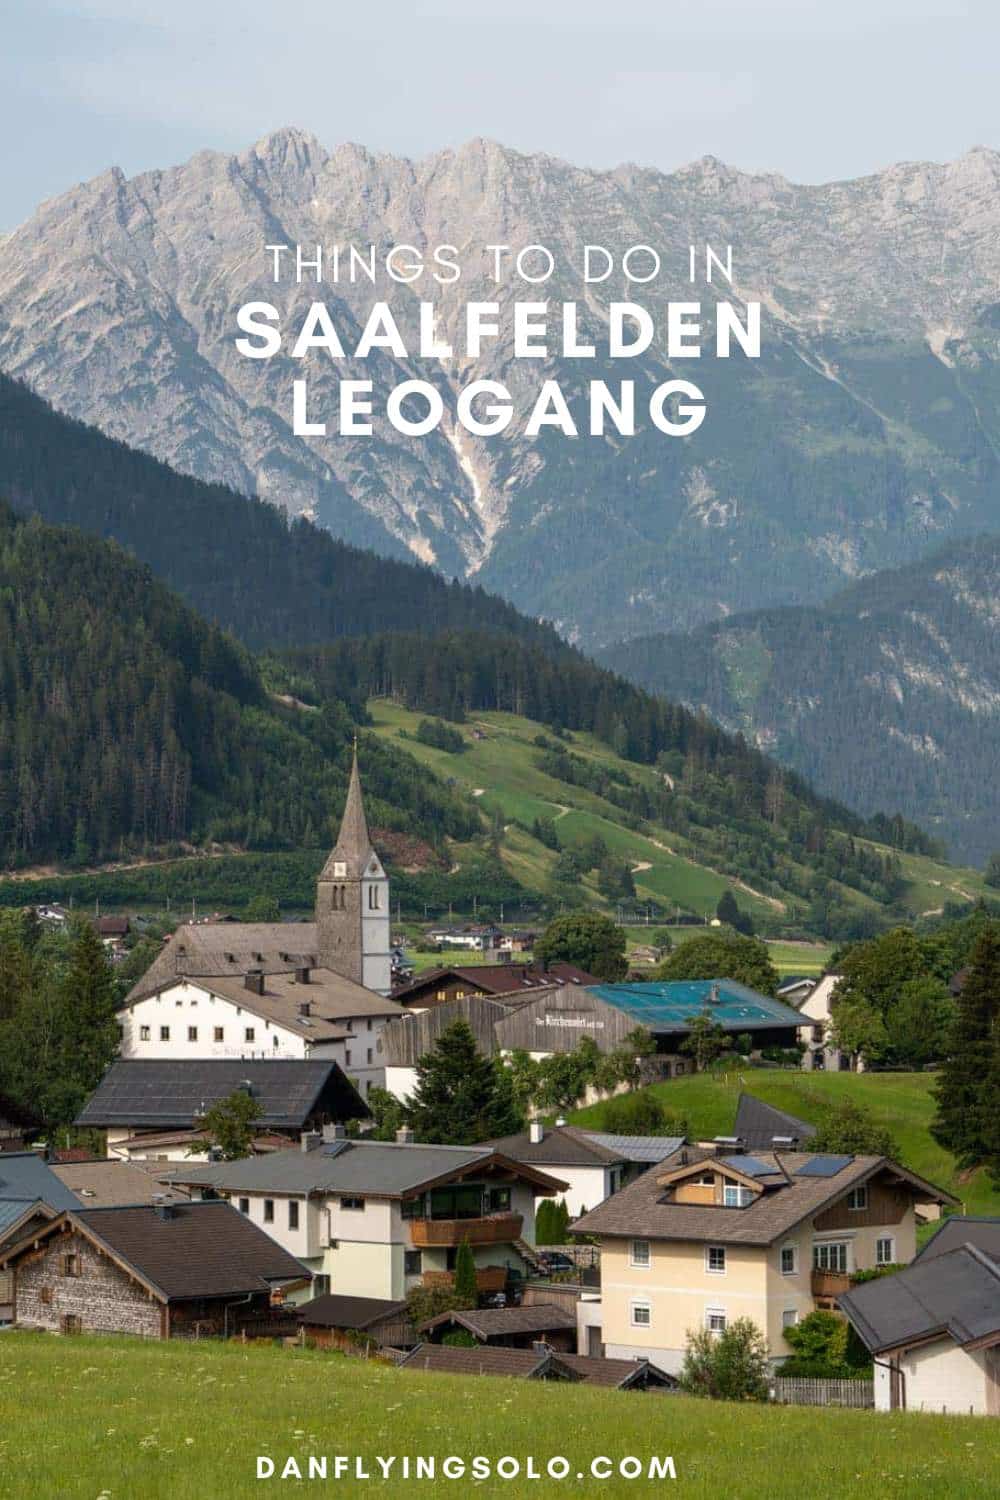 Saalfelden Leogang: Things to Do and Reasons to Visit / Discover the best things to do in Saalfelden Leogang, Austria, for a sustainable and stunning Austrian Alps escape.